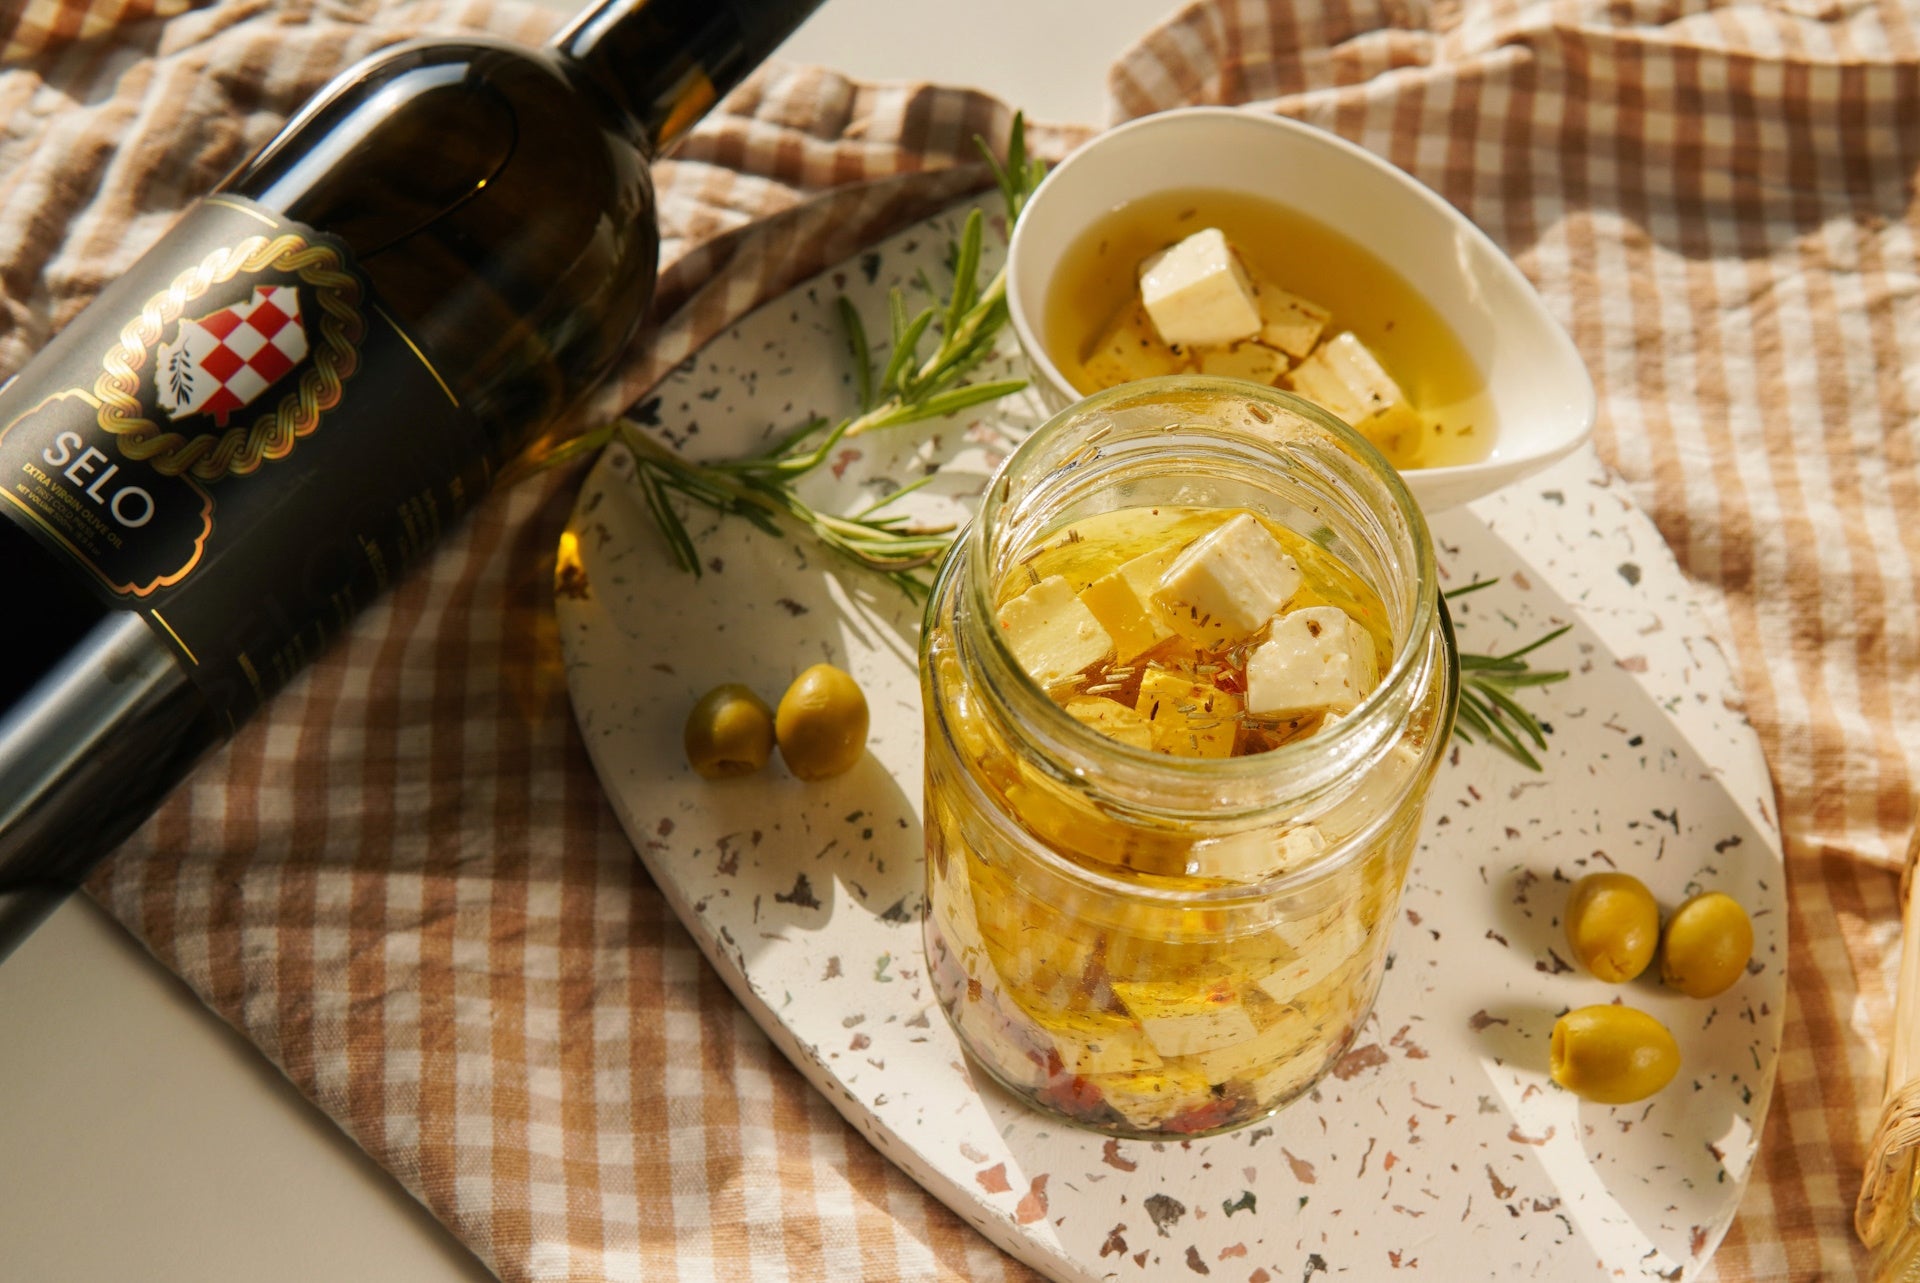 Glass jar filled with cubed feta cheese submerged in glistening olive oil.